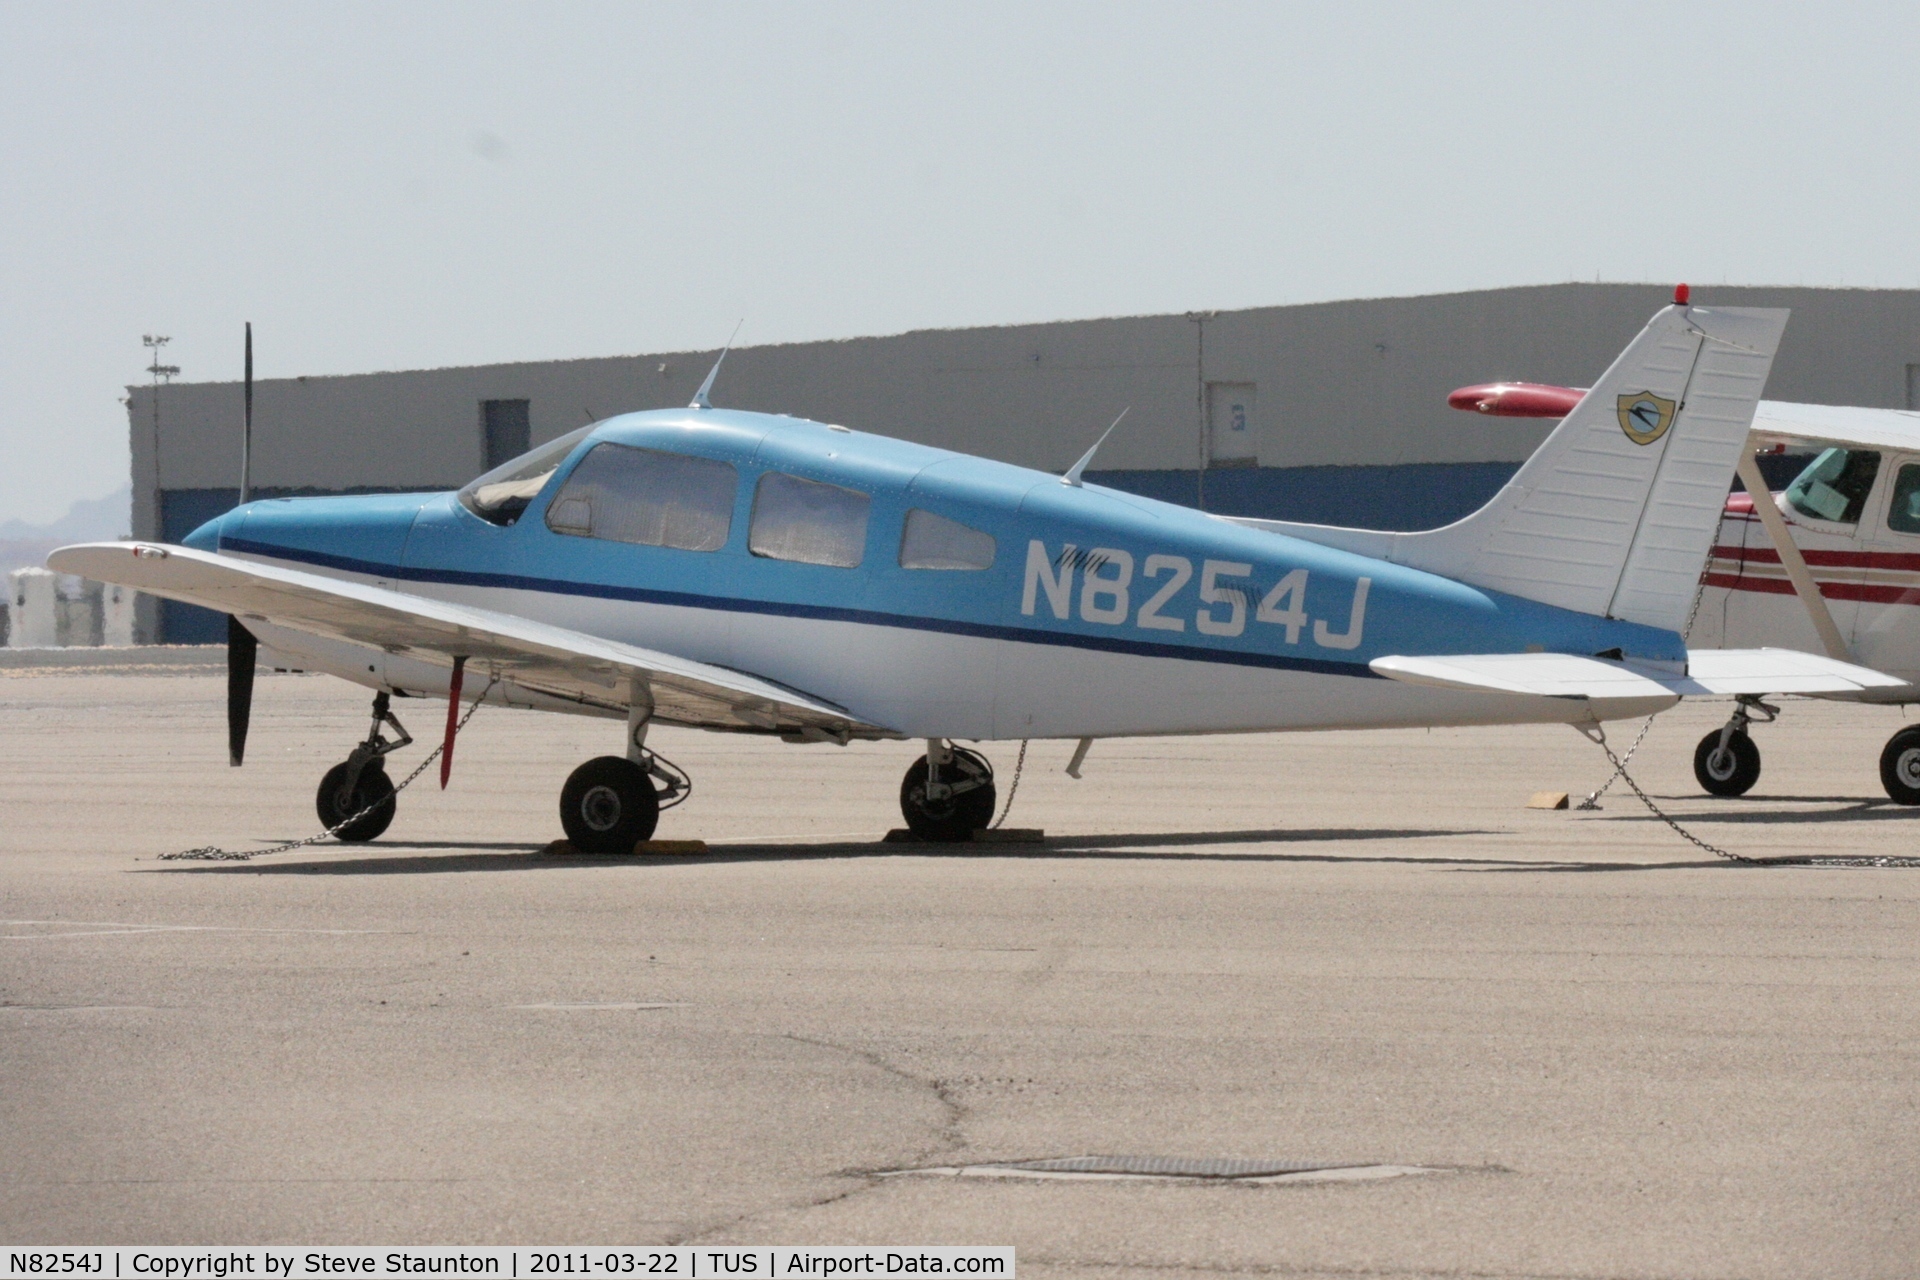 N8254J, 1982 Piper PA-28-161 C/N 28-8216186, Taken at Tucson International Airport, in March 2011 whilst on an Aeroprint Aviation tour